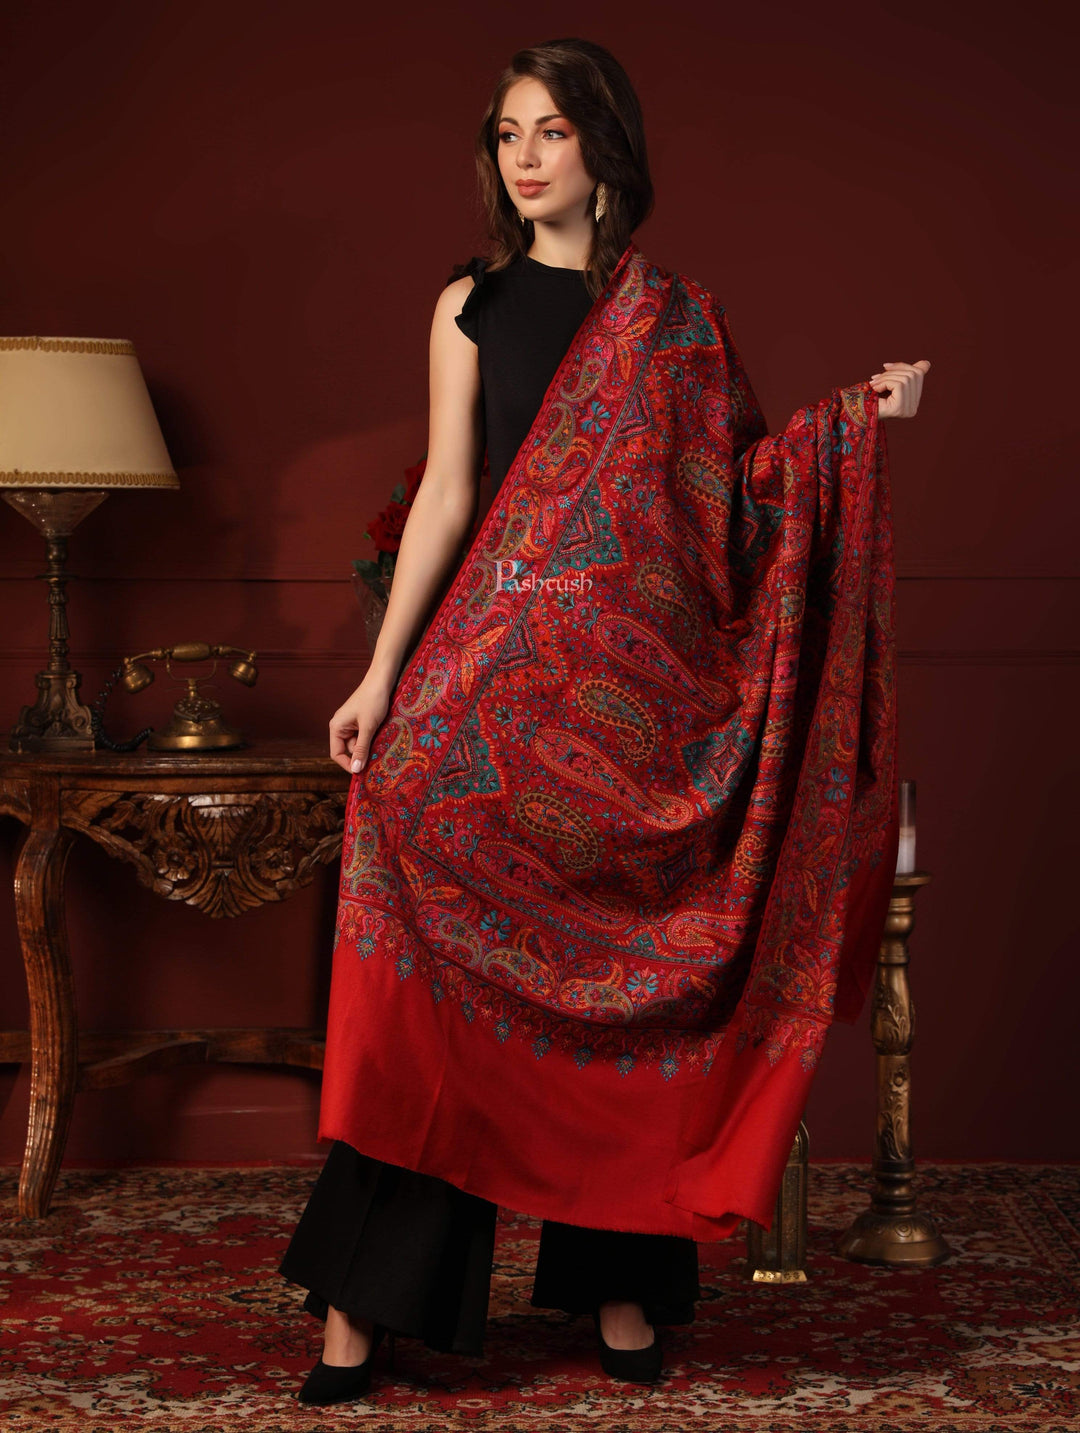 Pashtush India 100x200 Pashtush Womens Papier-mâché Embroidered Shawl, Fine Wool with Silky Embroidery, Scarlet Red